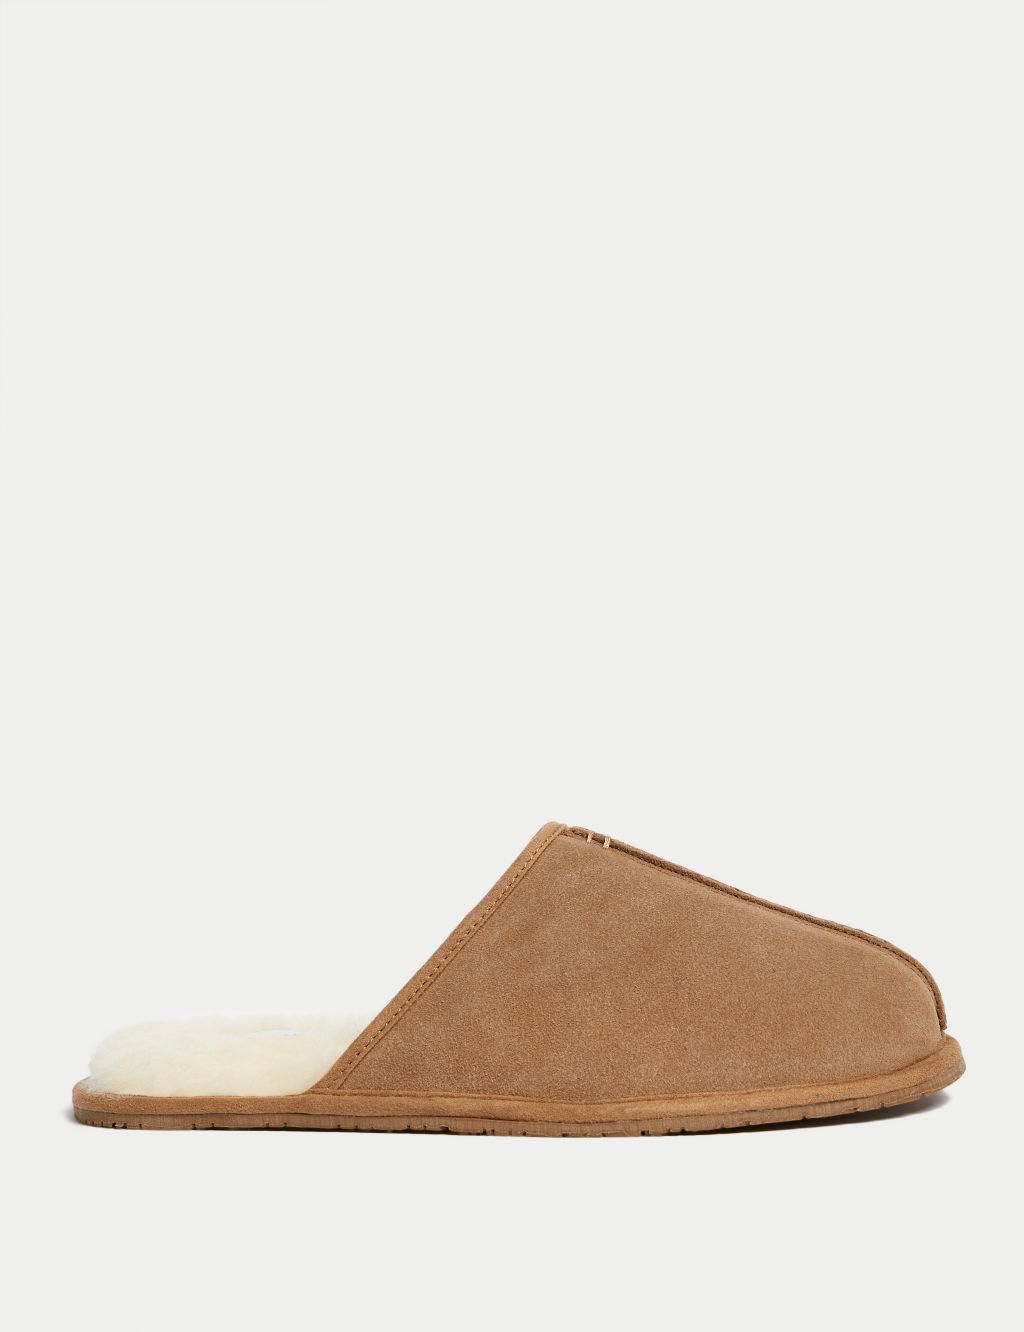 Men’s Leather Slippers |M&S | M&S